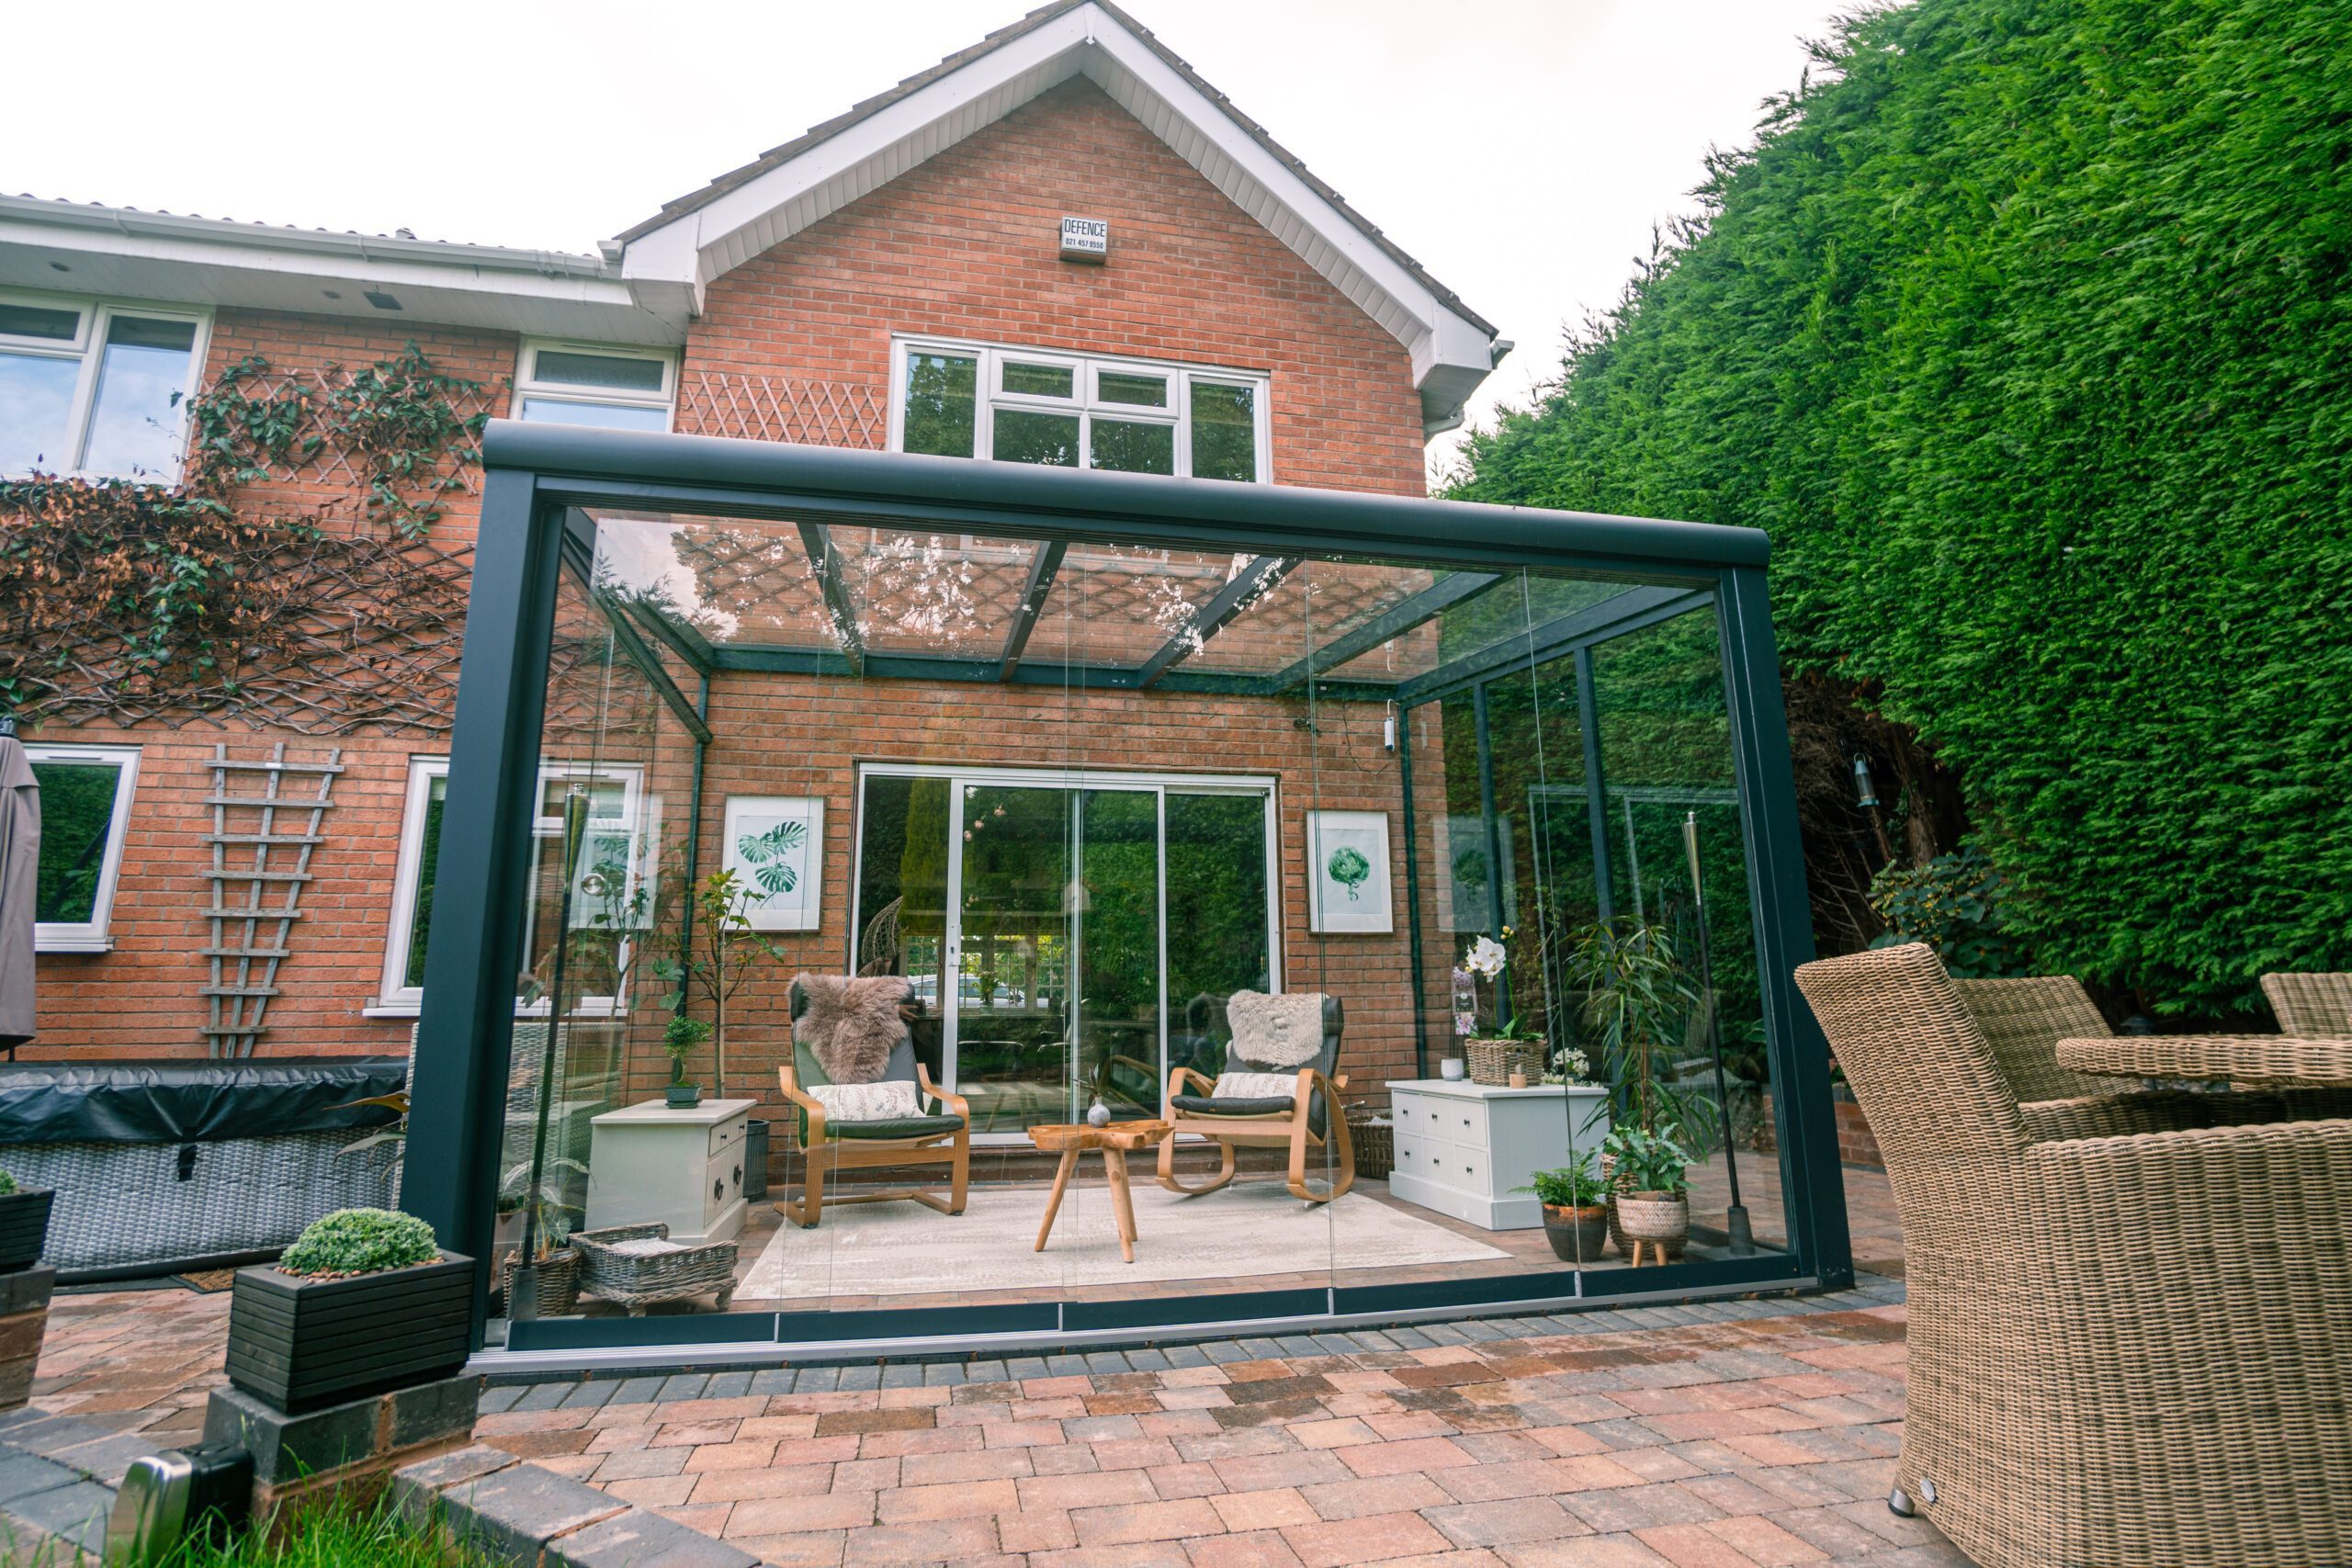 A modern glass veranda attached to the rear of a brick house with chairs inside